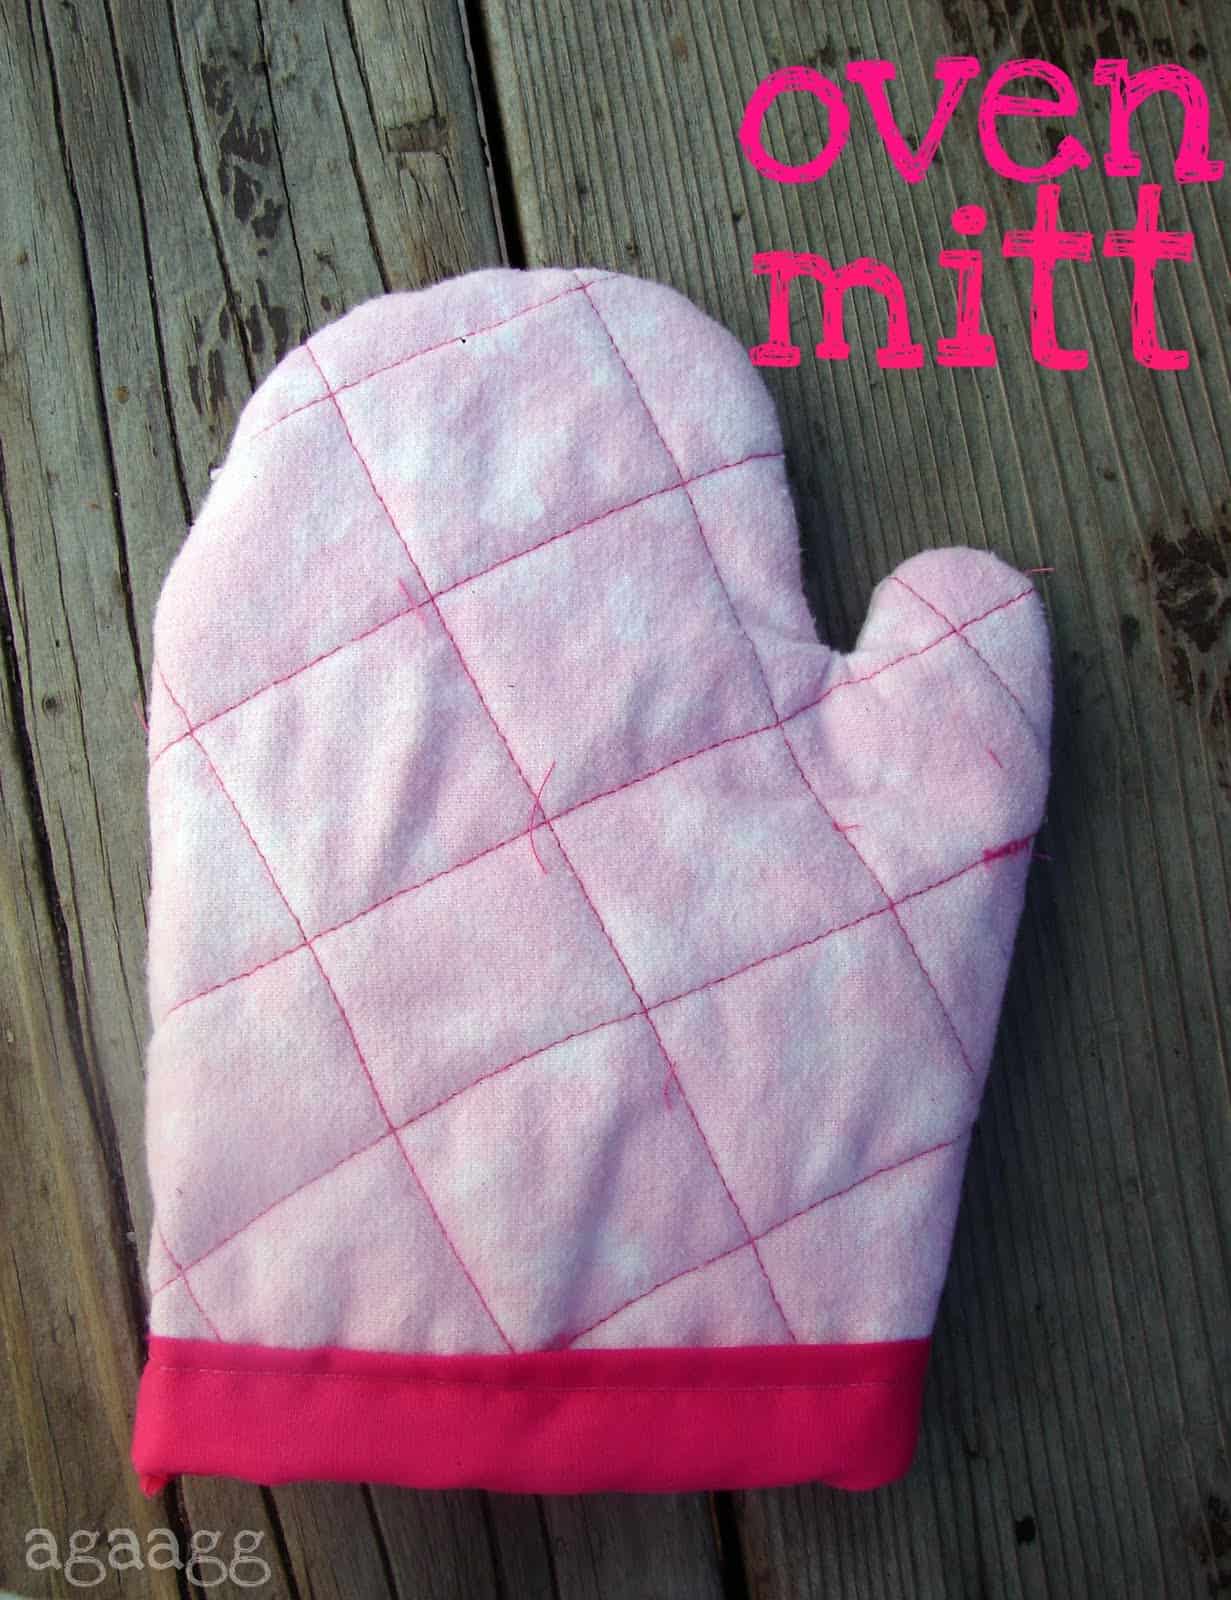 Kid sized oven mitts